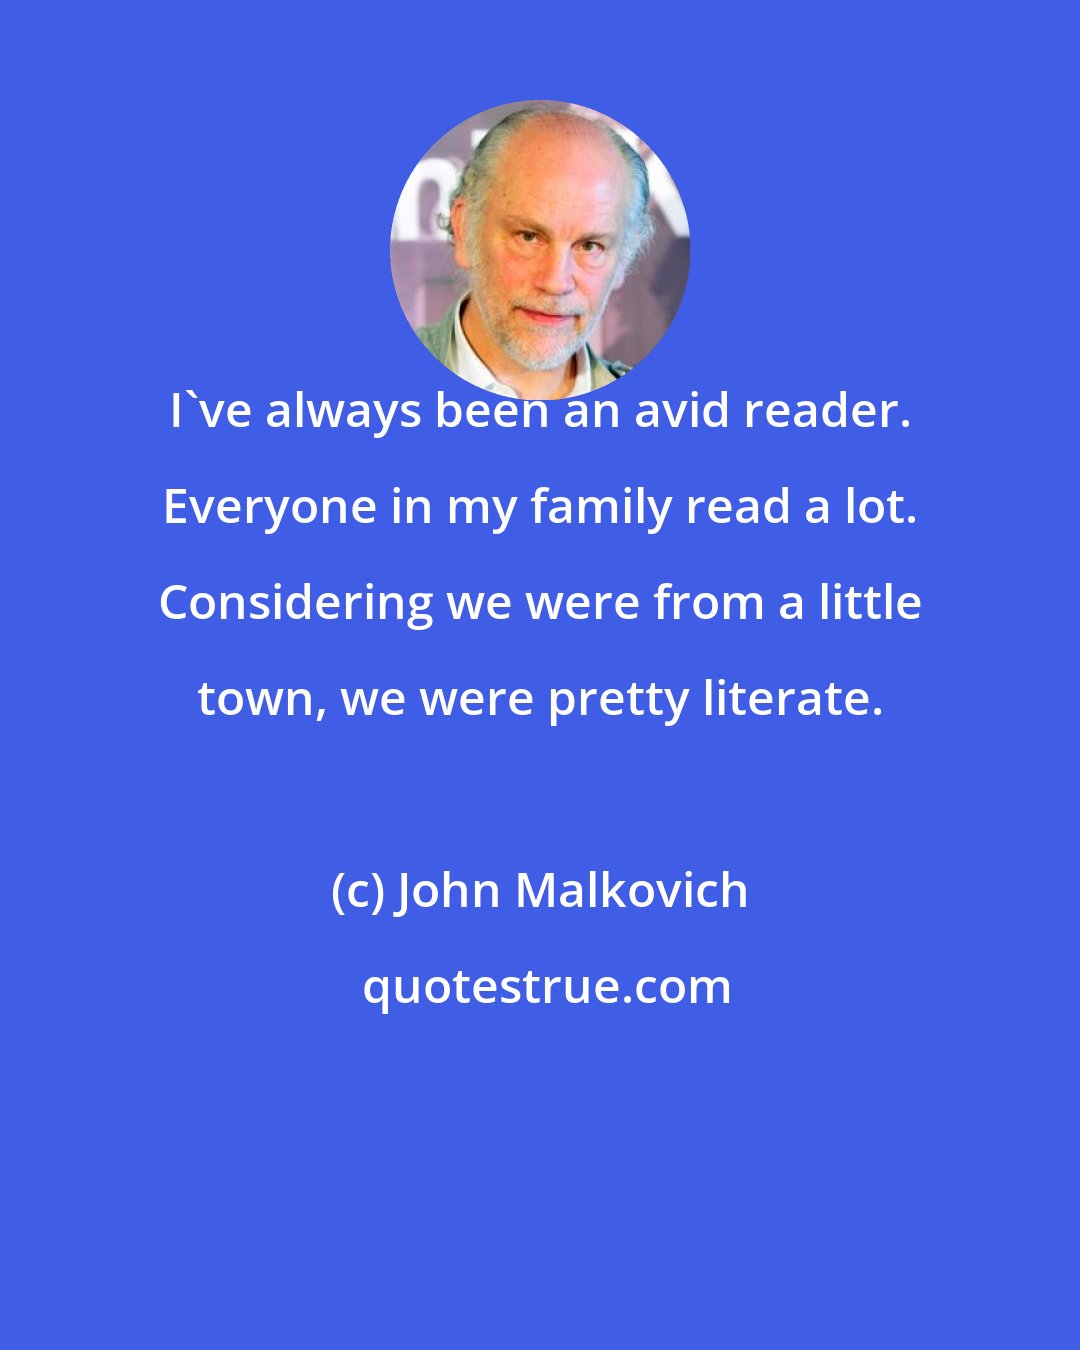 John Malkovich: I've always been an avid reader. Everyone in my family read a lot. Considering we were from a little town, we were pretty literate.